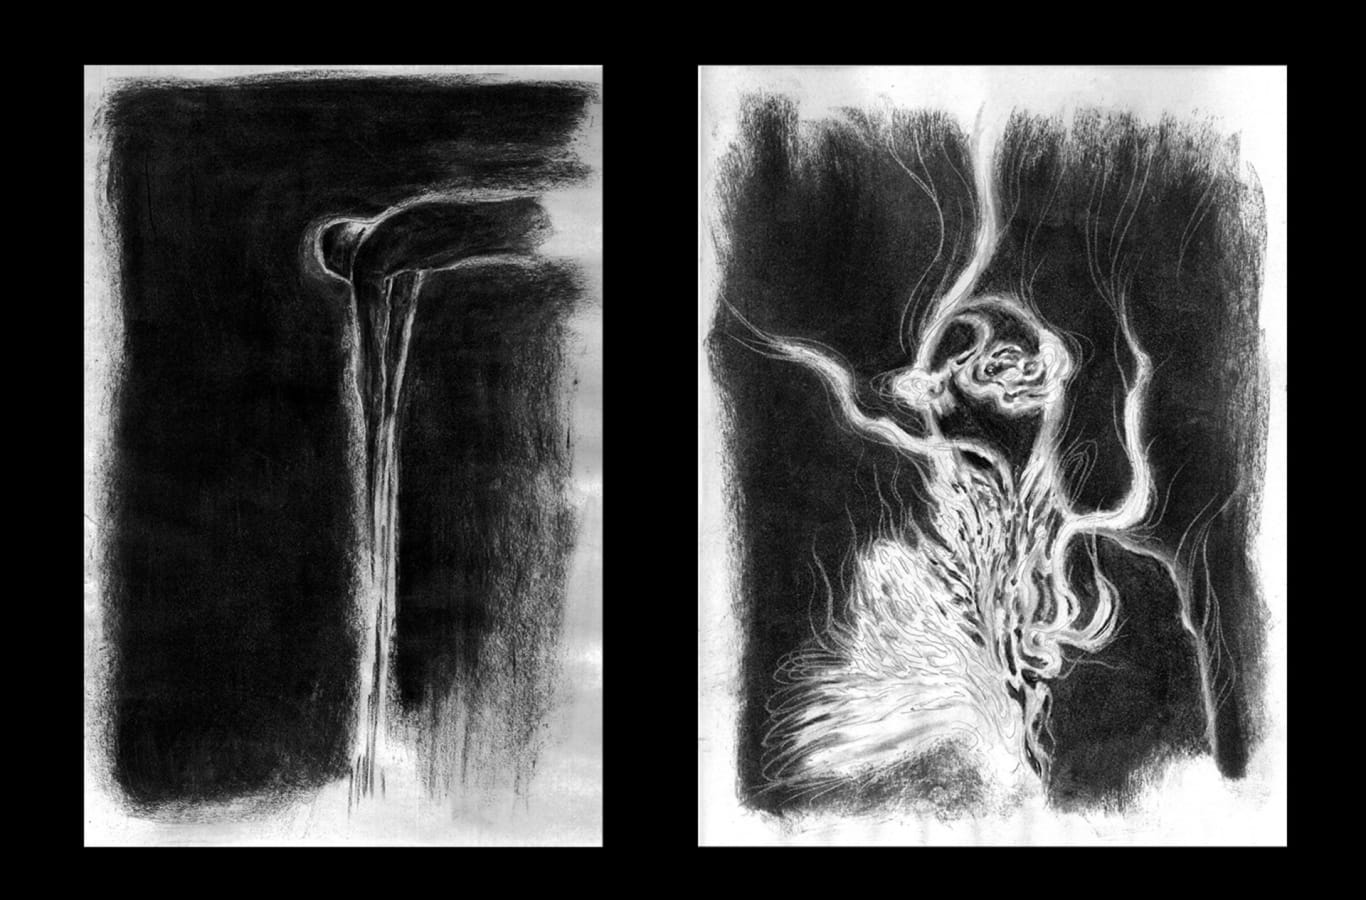 Two black and white images. One of a figure, sideways near the top of the image, with its long arms pointing down and an abstract image of shapes and tendrils emanating from its base.